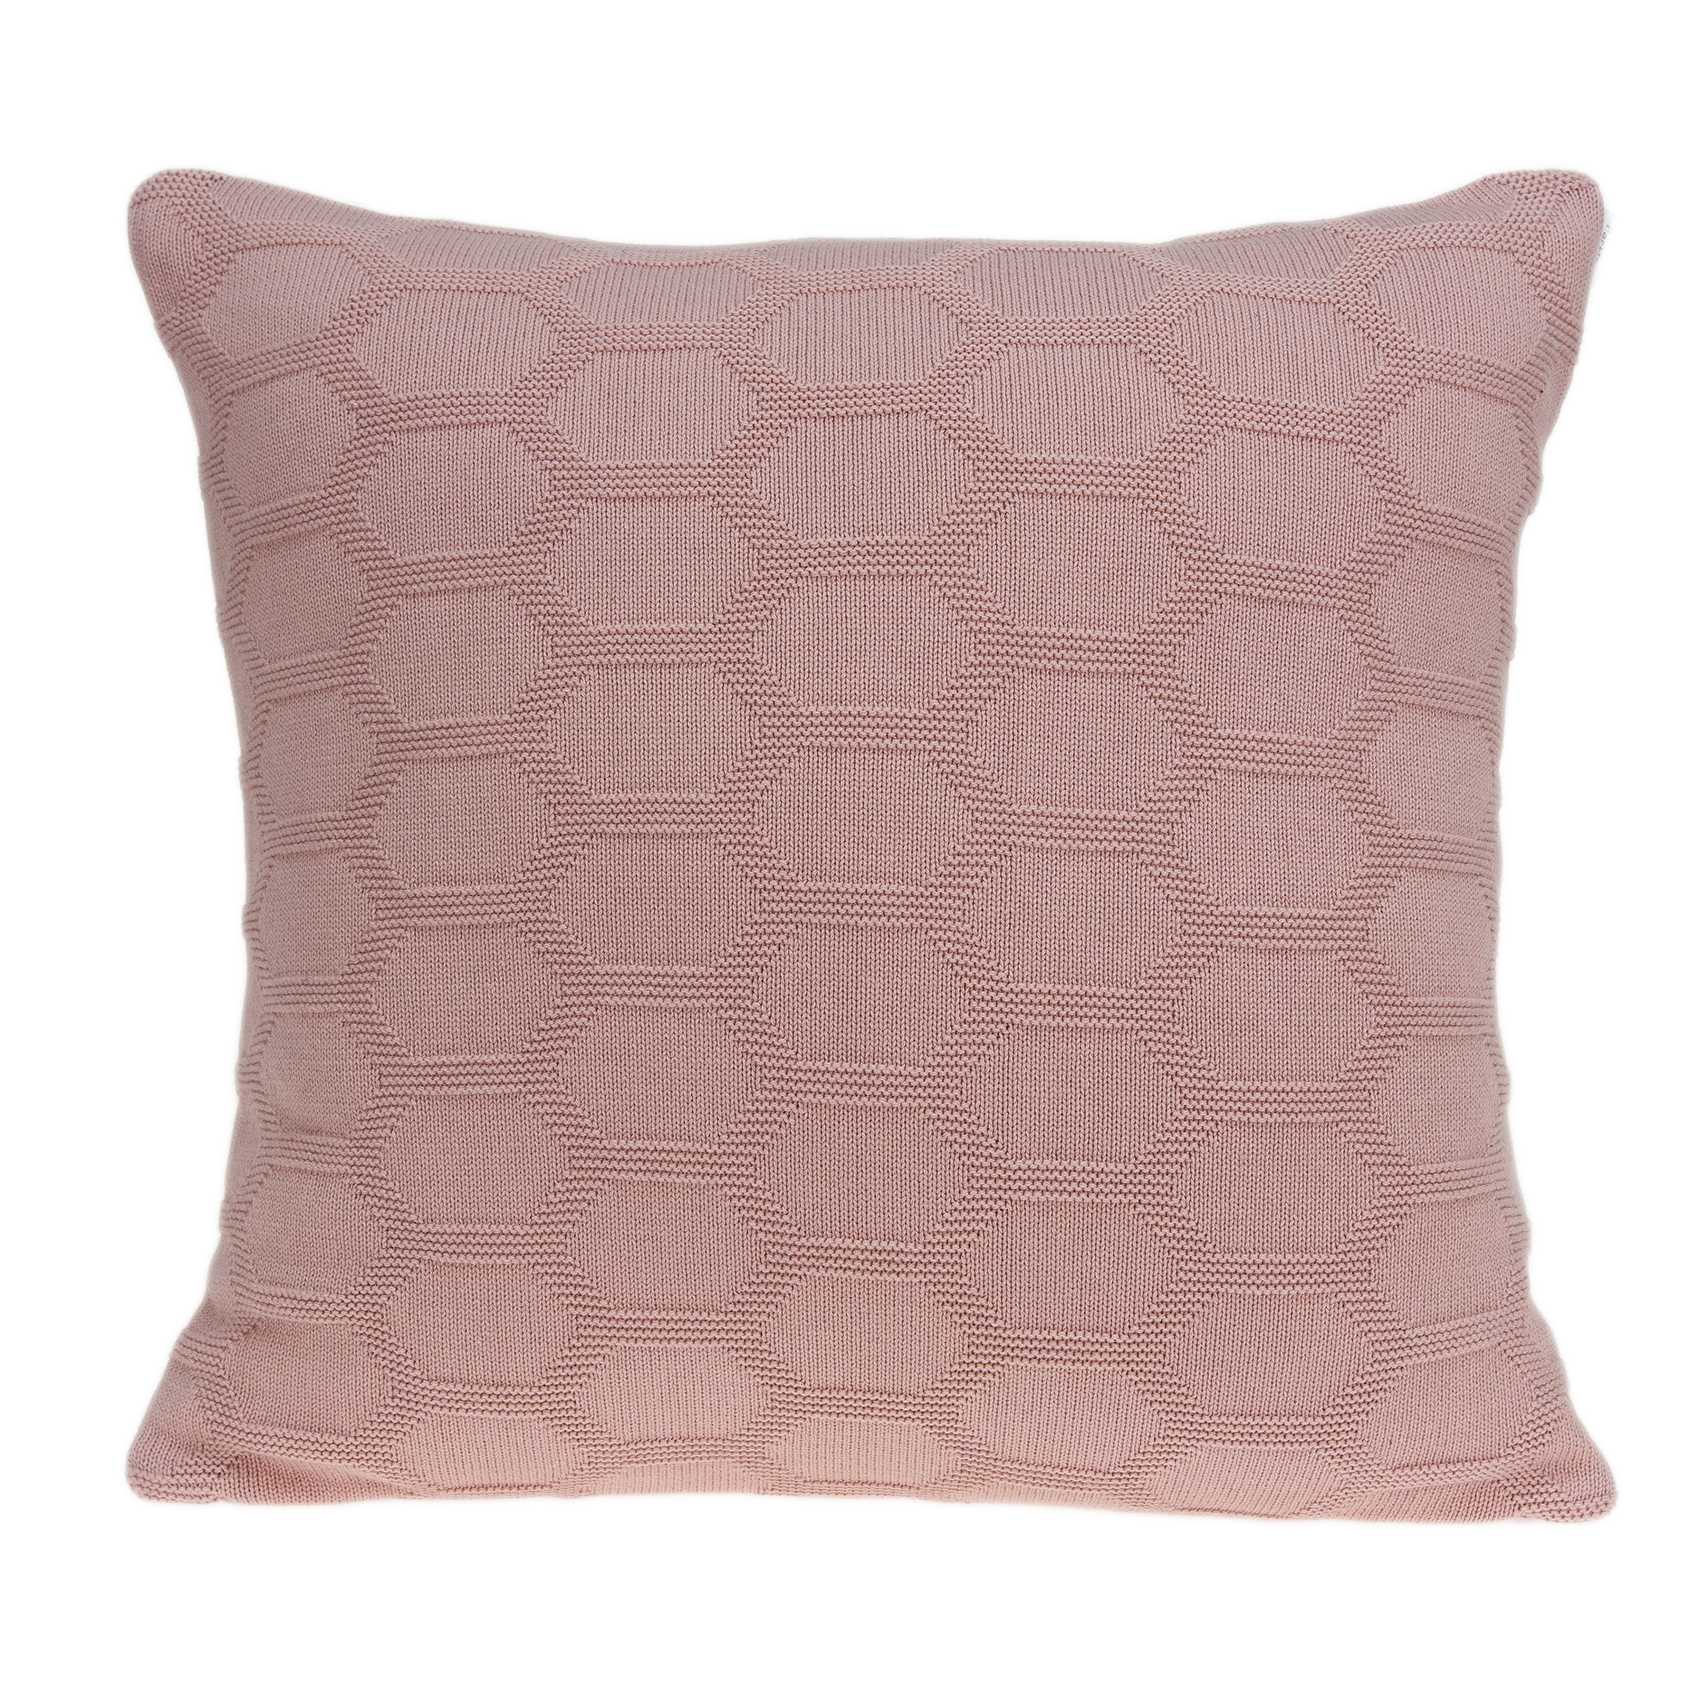 20" x 7" x 20" Transitional Pink Pillow Cover With Down Insert